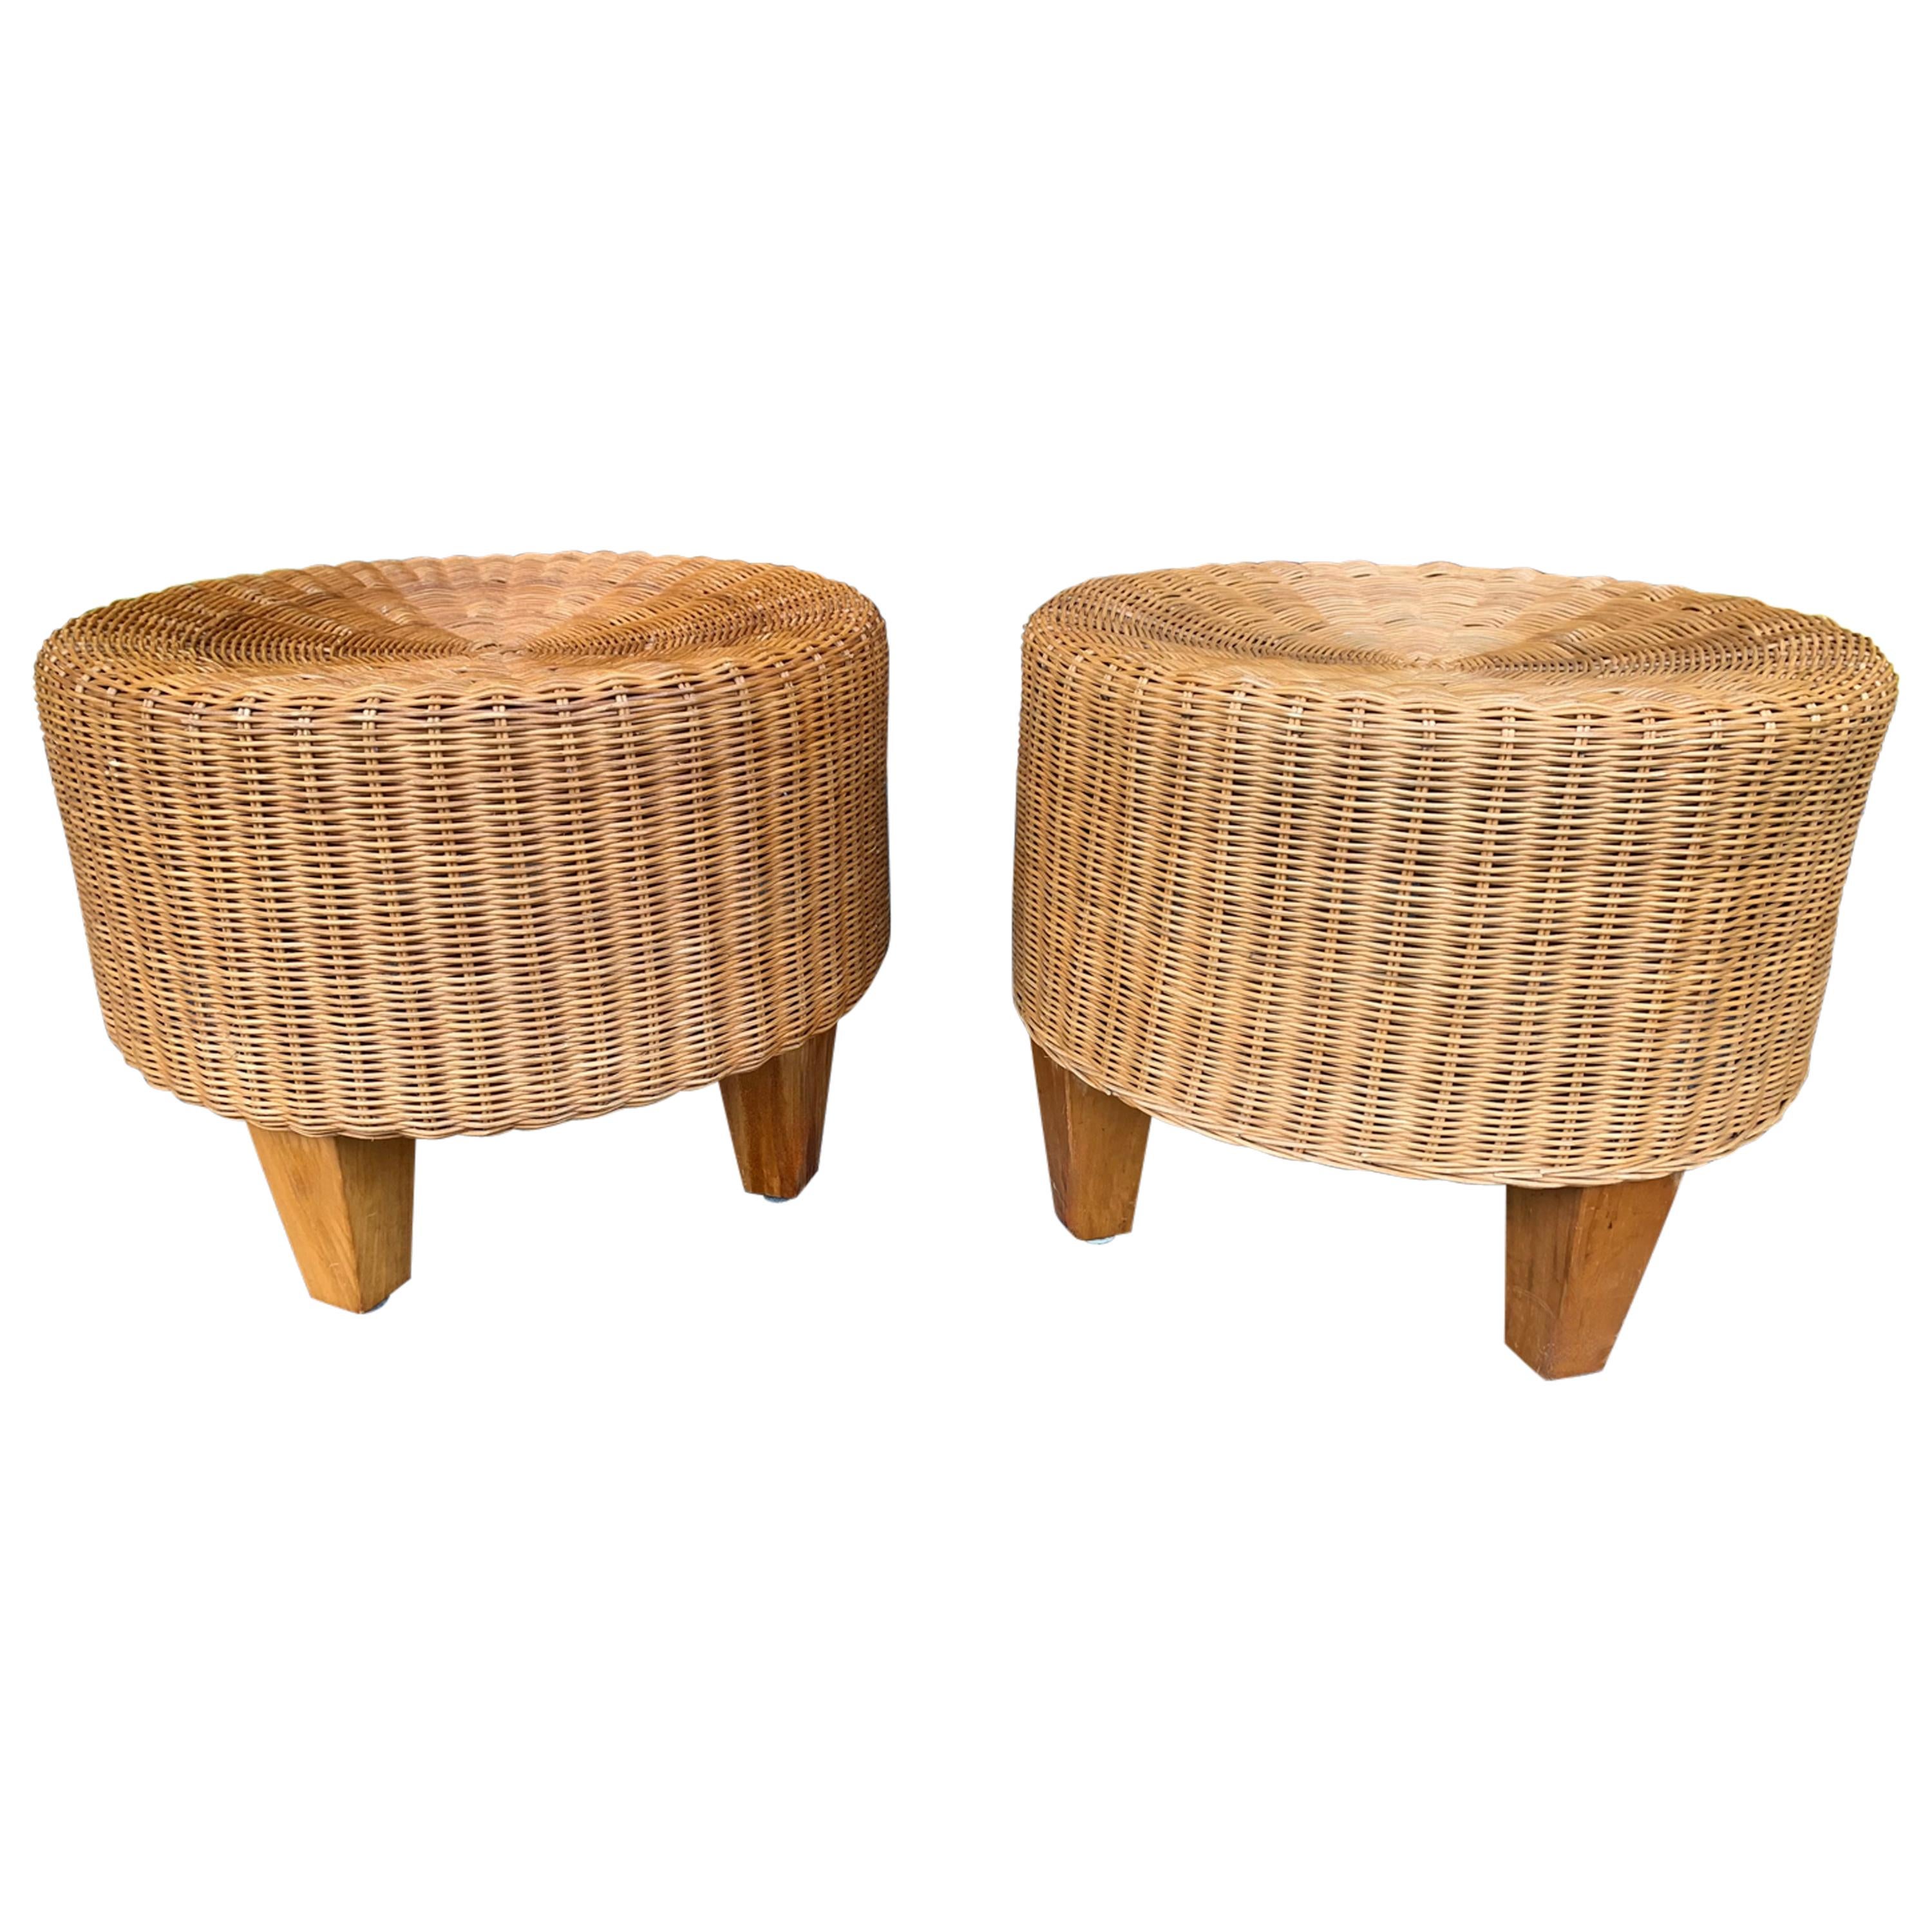 Pair of Rattan and Wood Poufs Stools, Italy, 1980s